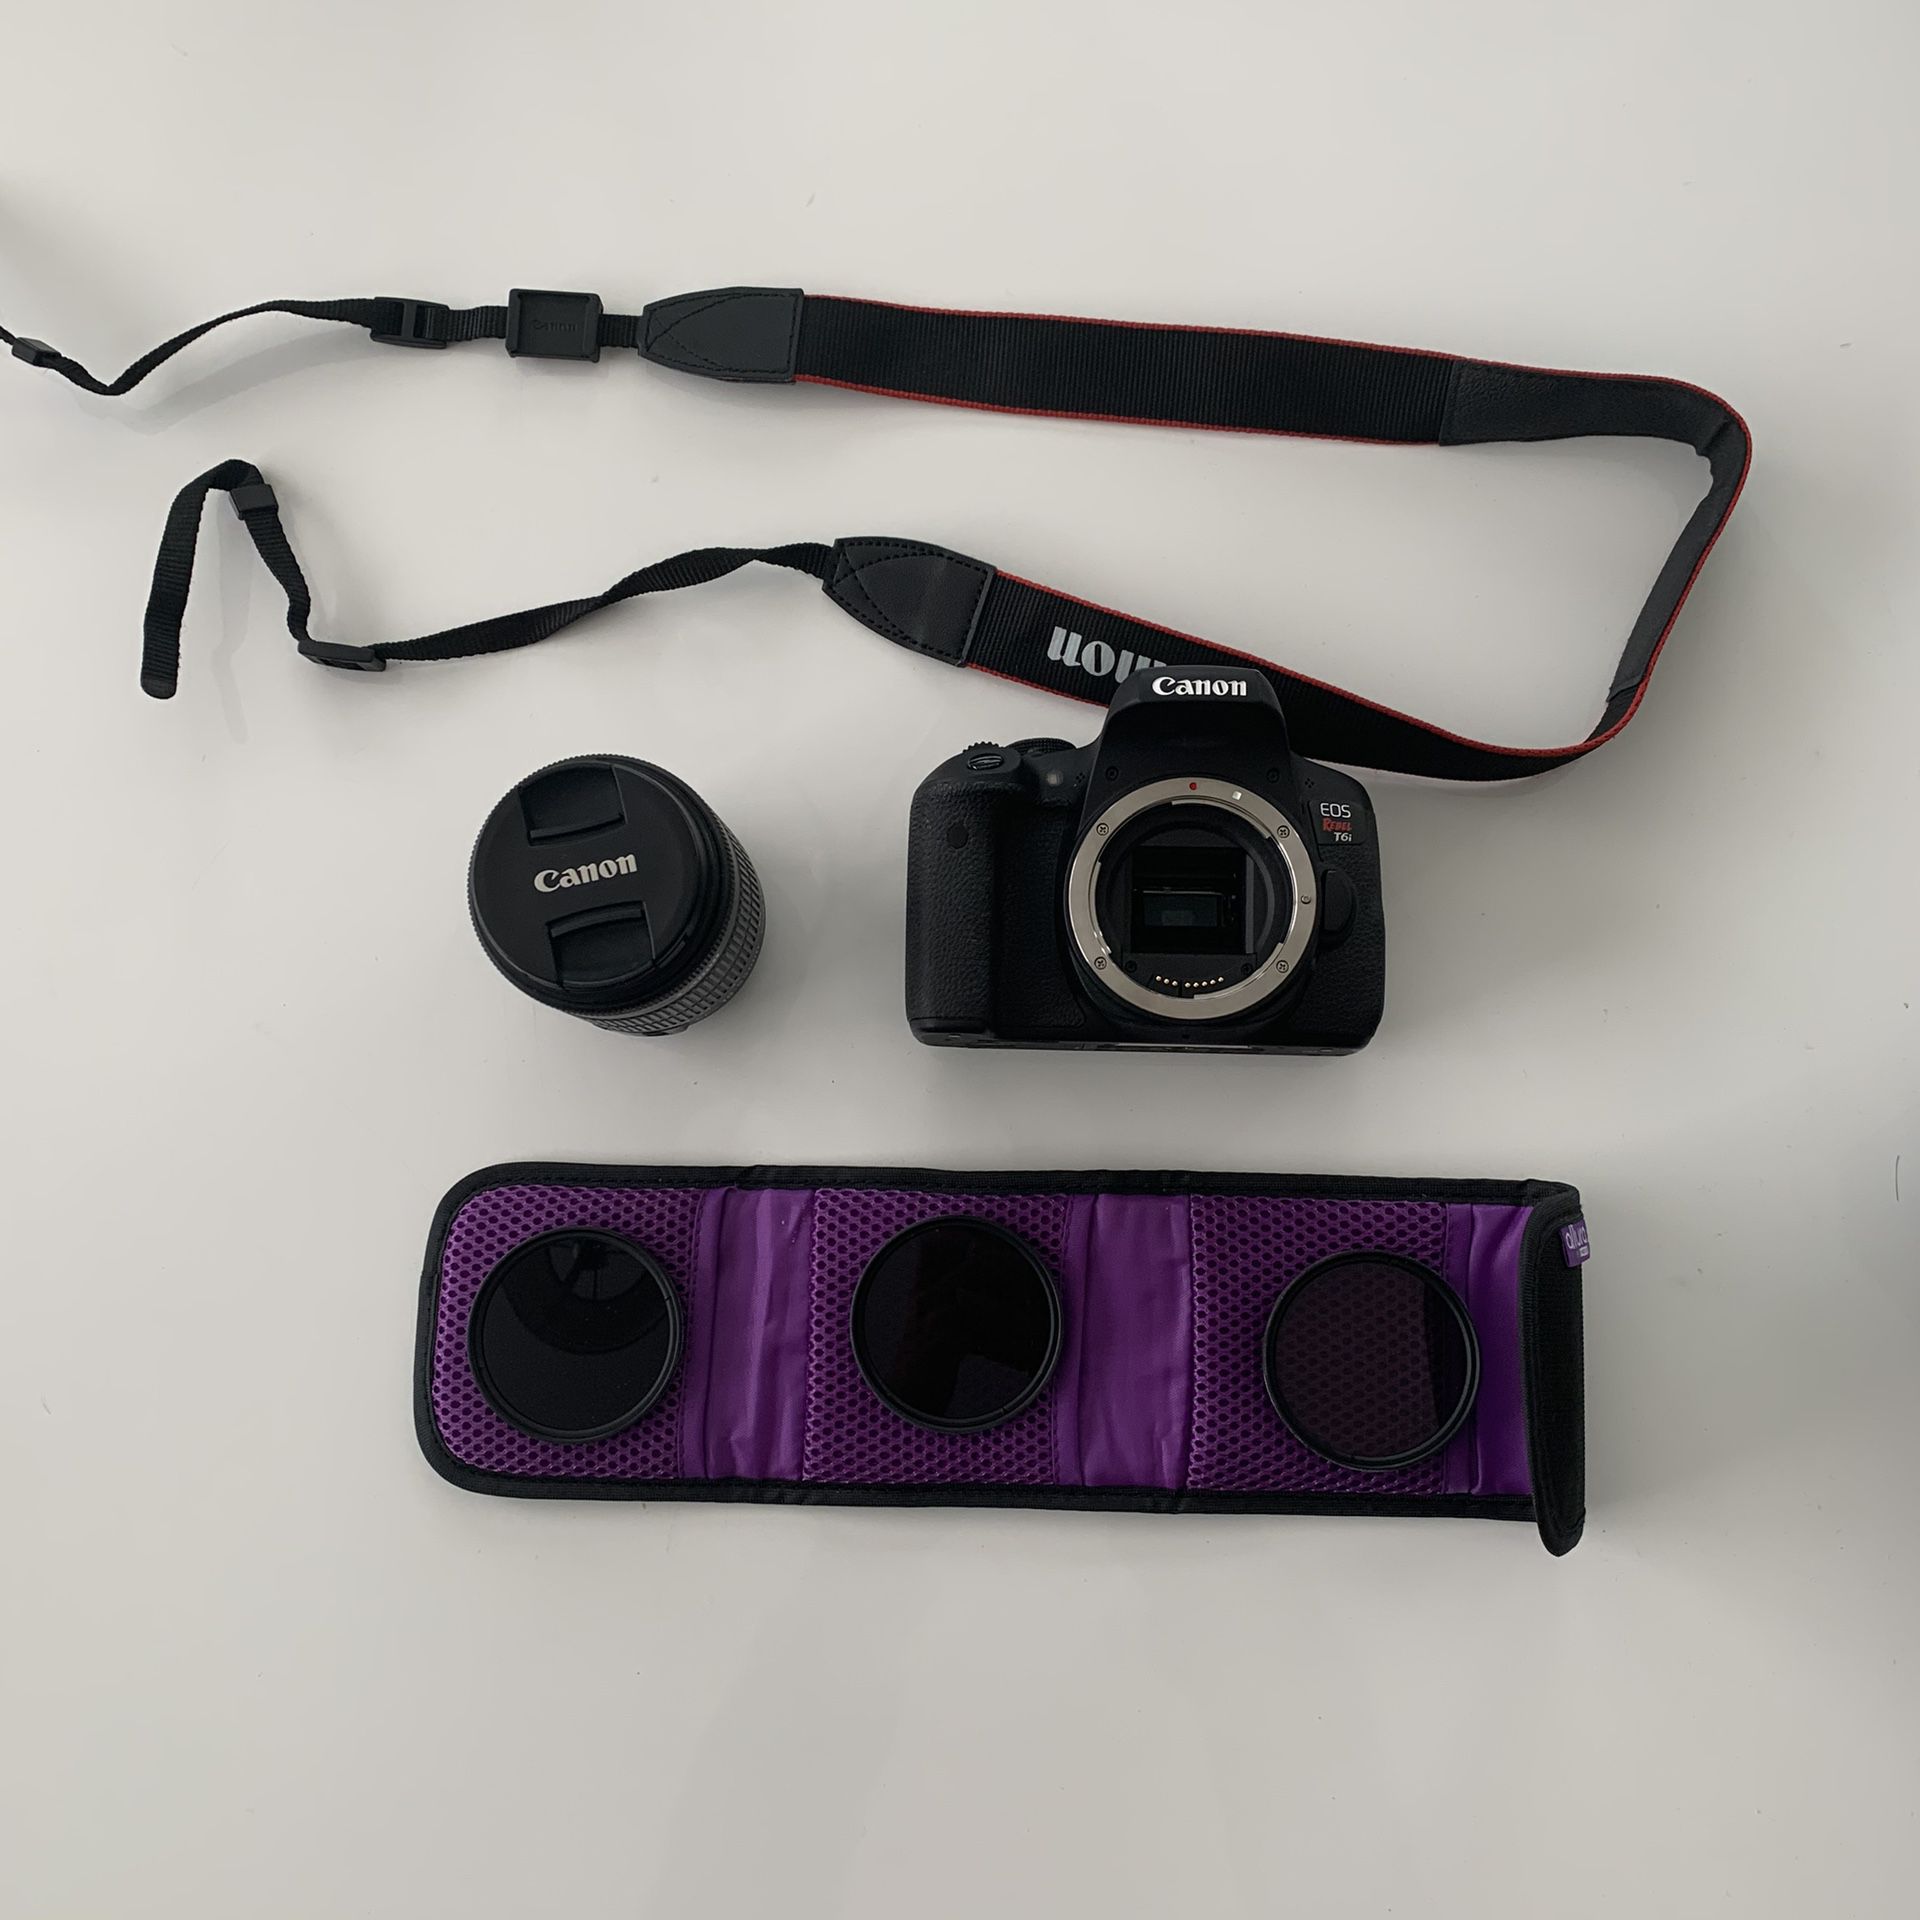 Canon Rebel T6i Kit + Accessories and Bag